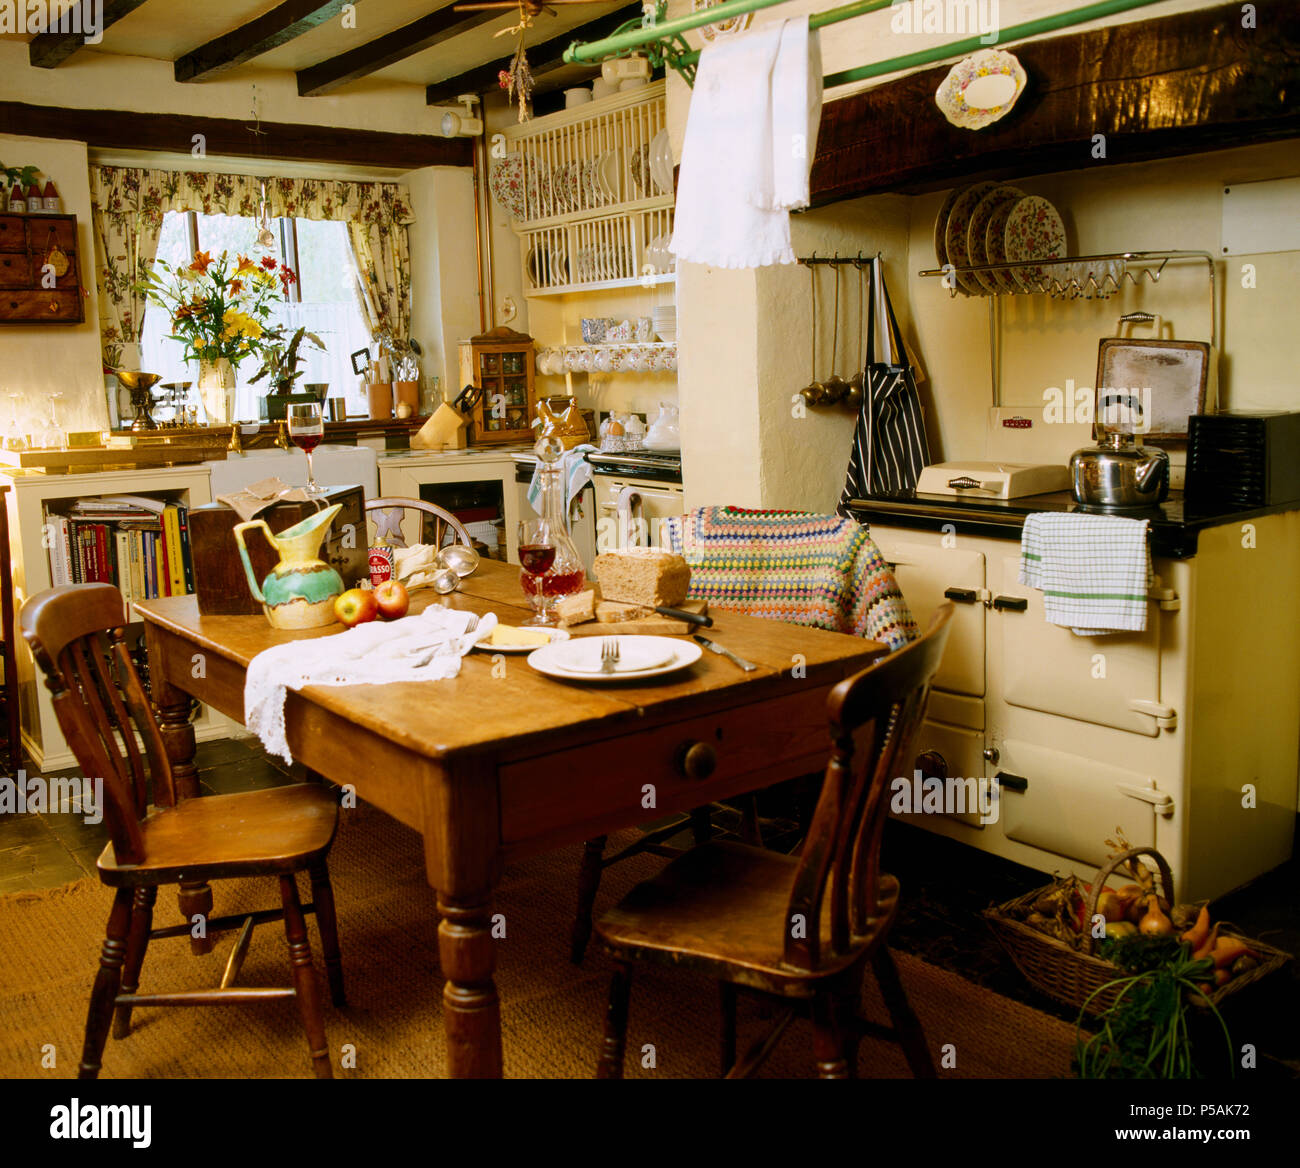 Nice retro kitchen table chairs Vintage Kitchen Table Chairs Banque D Image Et Photos Alamy